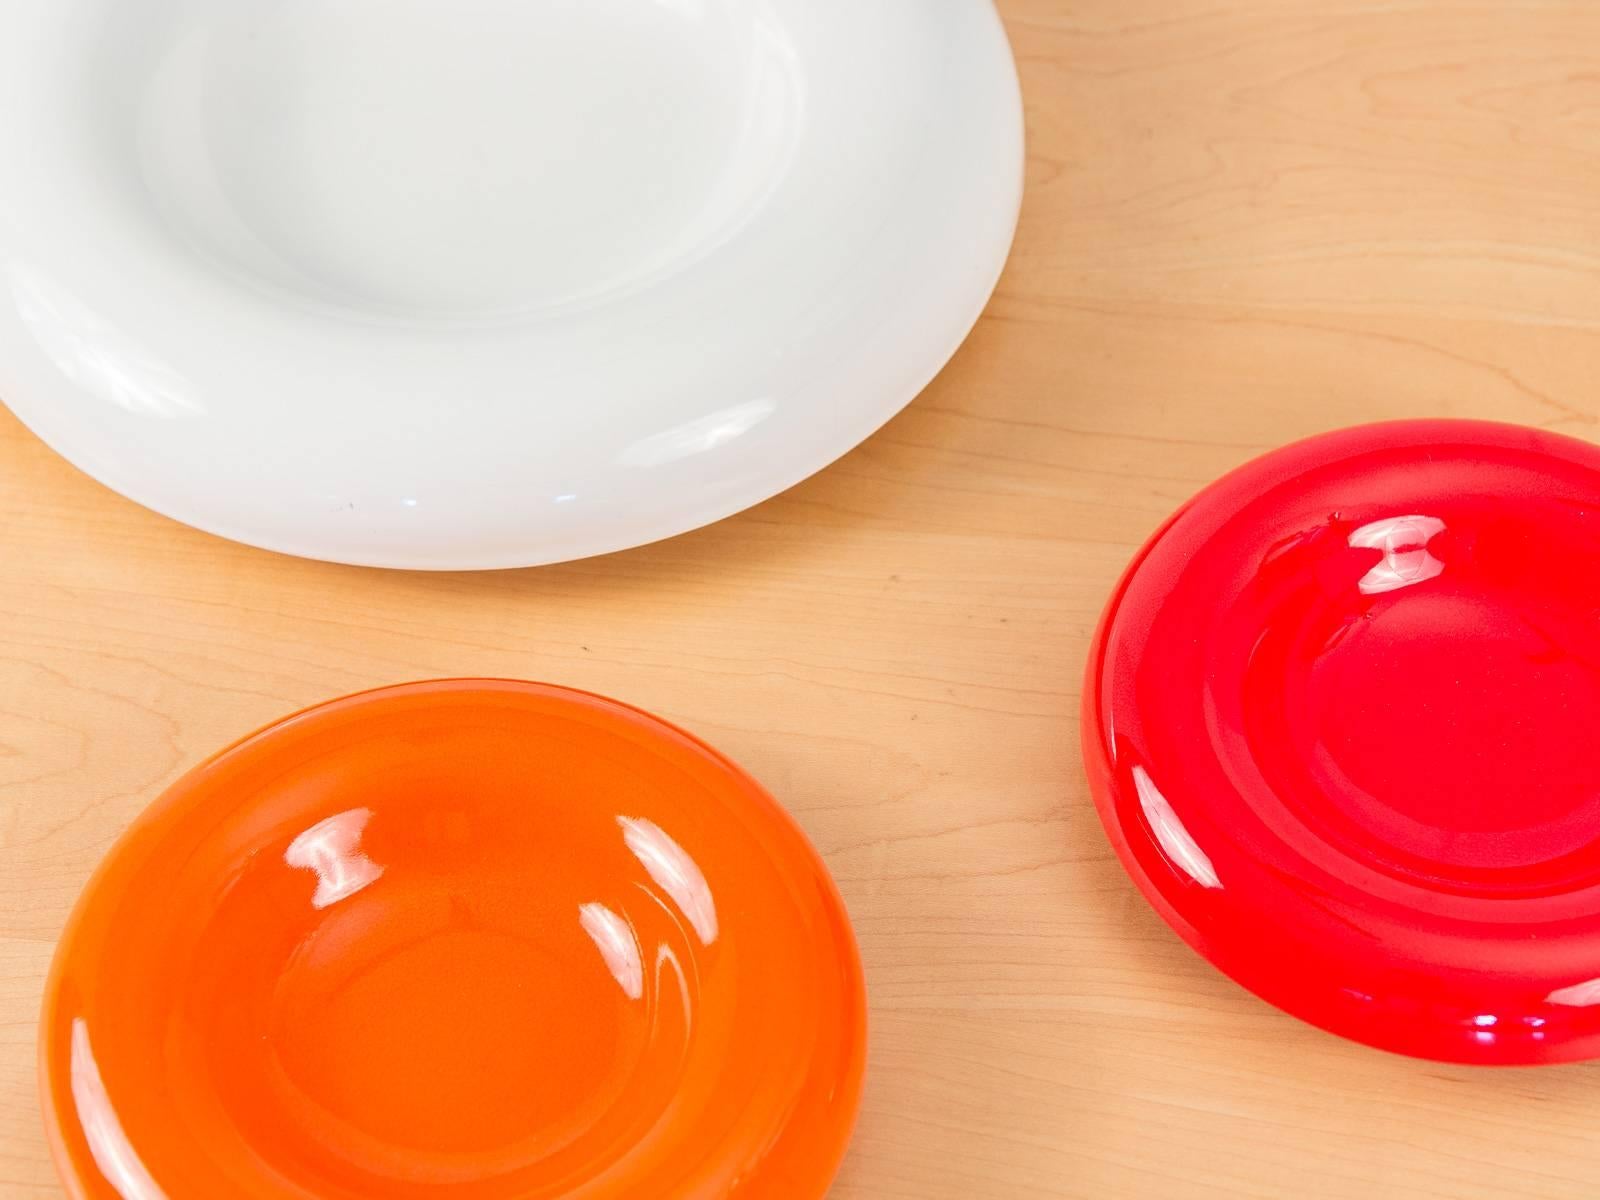 Three bold, mod 1960s ceramic plates with shallow center and rounded-wide rims for Sicart. Marked “611 Italy” on the underside.

Small orange and red plates measure 8” in diameter, and the large white plate measures 12.5” diameter.